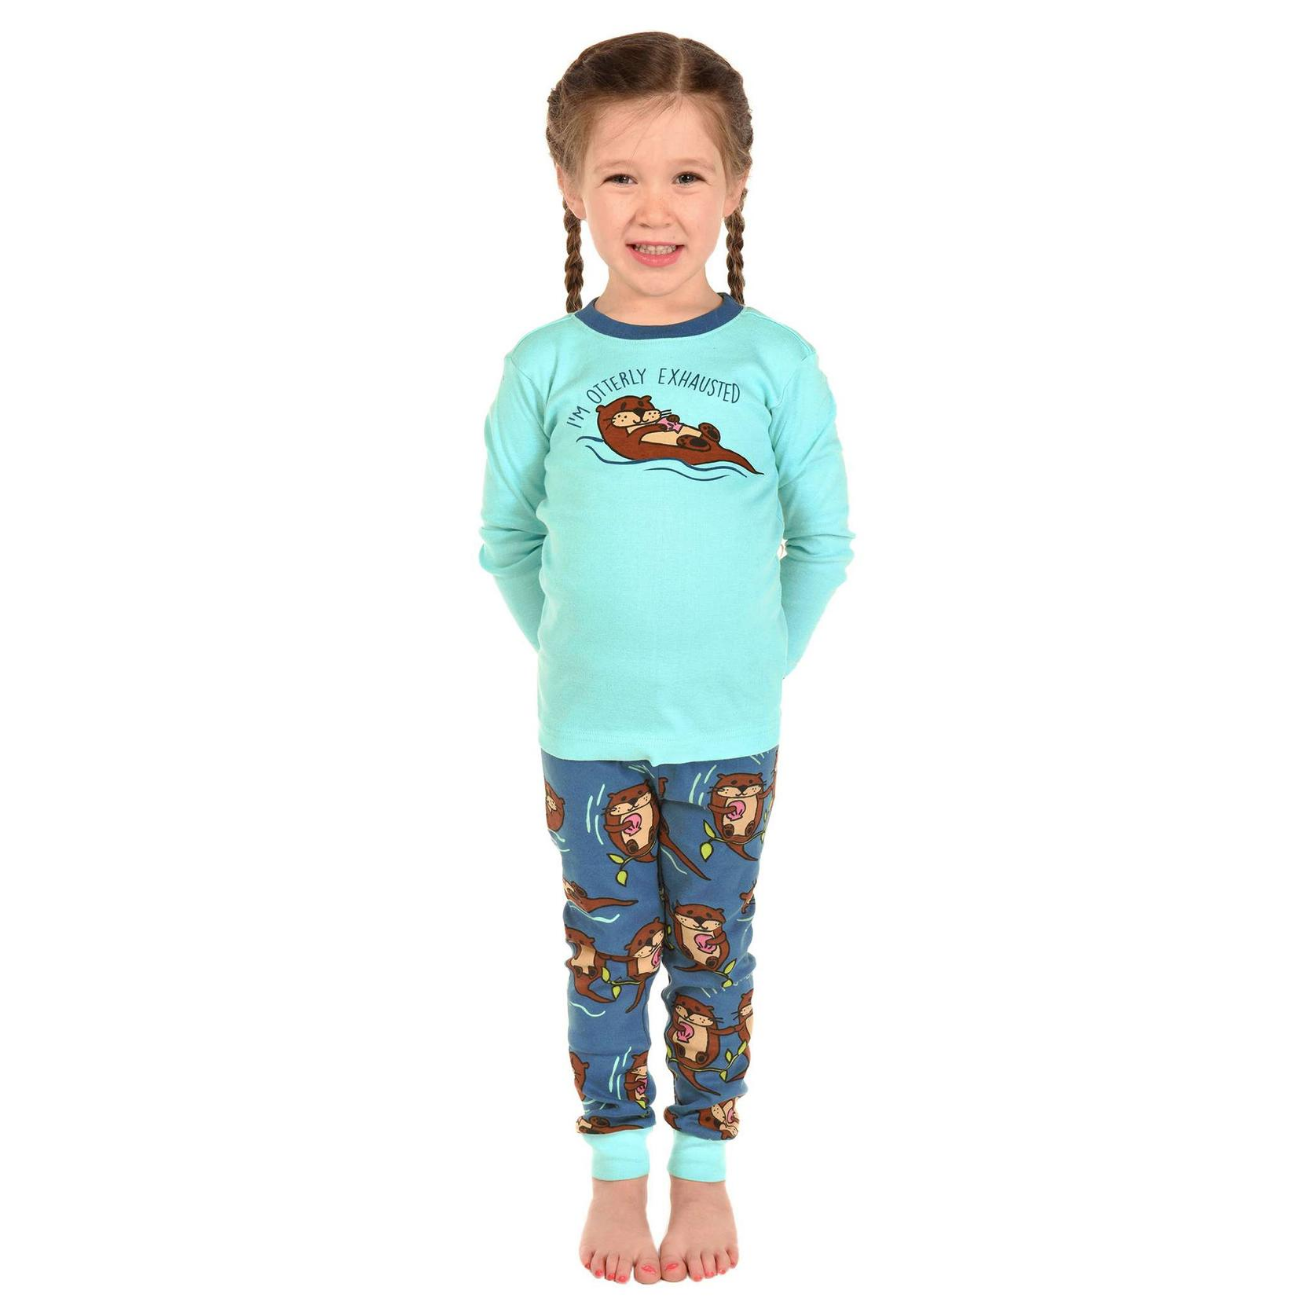 Kids Apparel - Forests, Tides, and Treasures